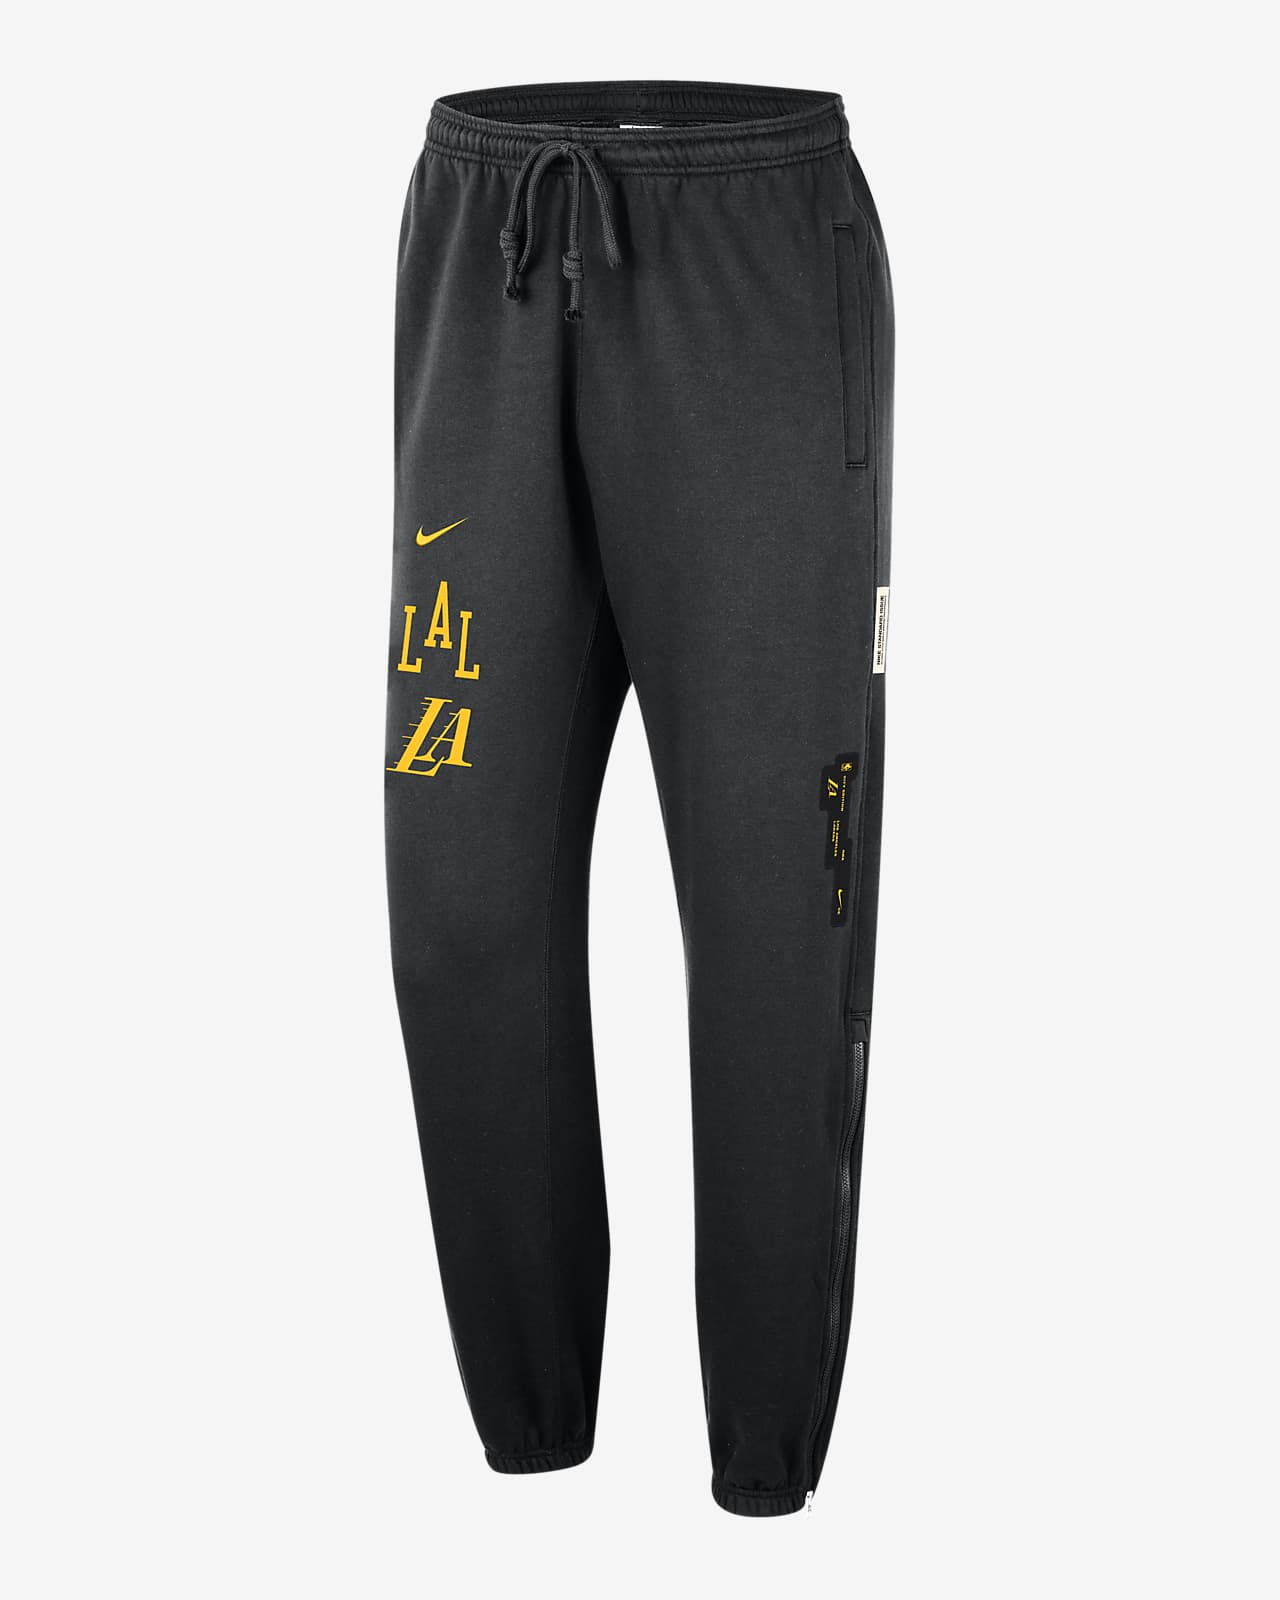 Los Angeles Lakers Standard Issue City Edition Men's Nike NBA Courtside  Pants.